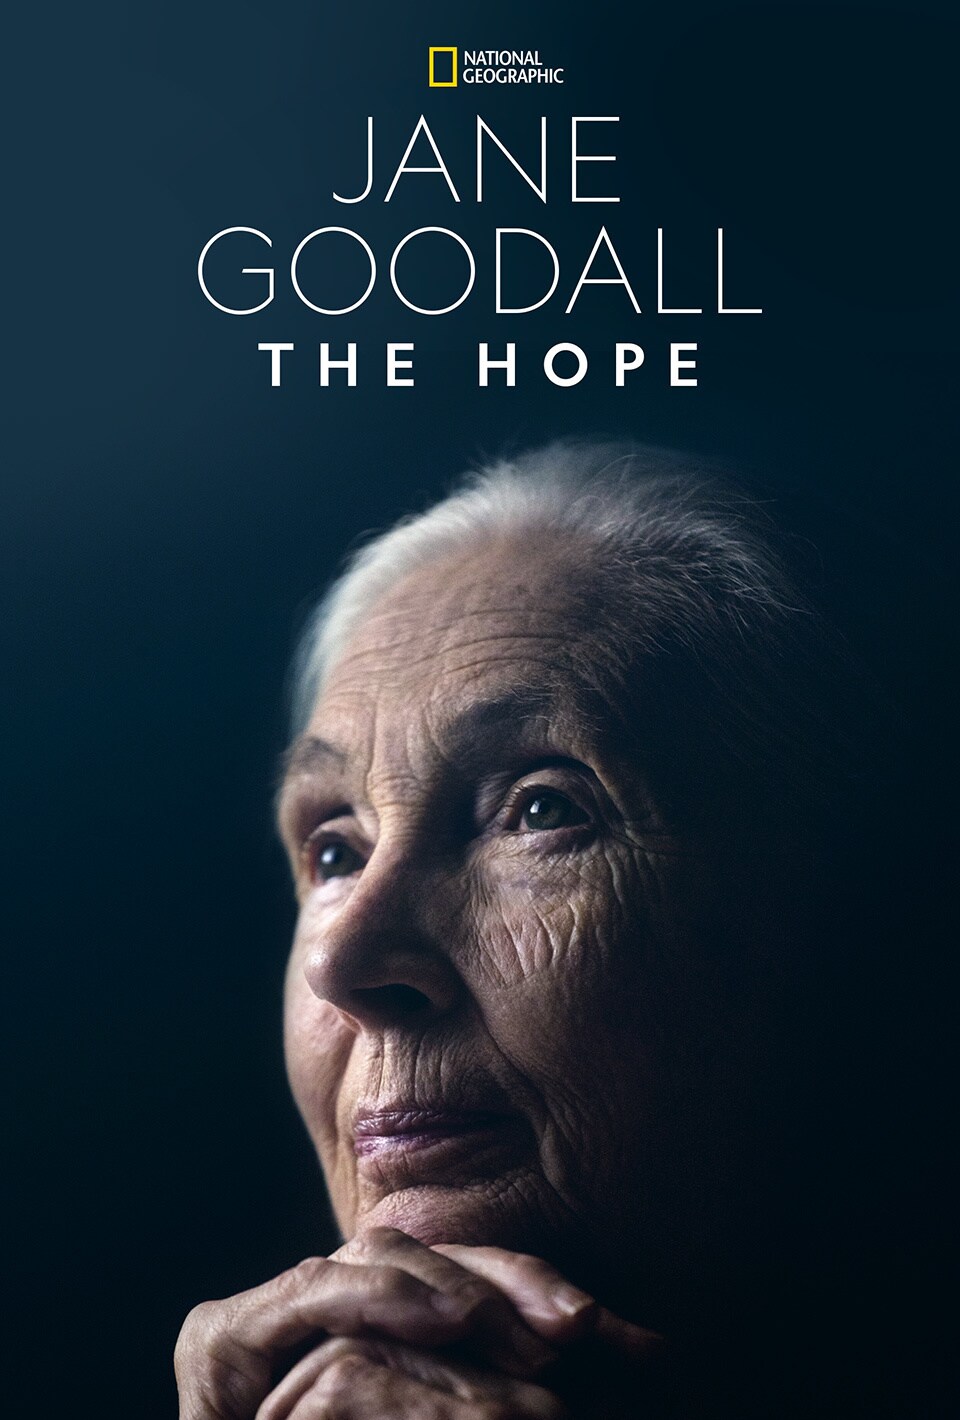 National Geographic | Jane Goodall: The Hope